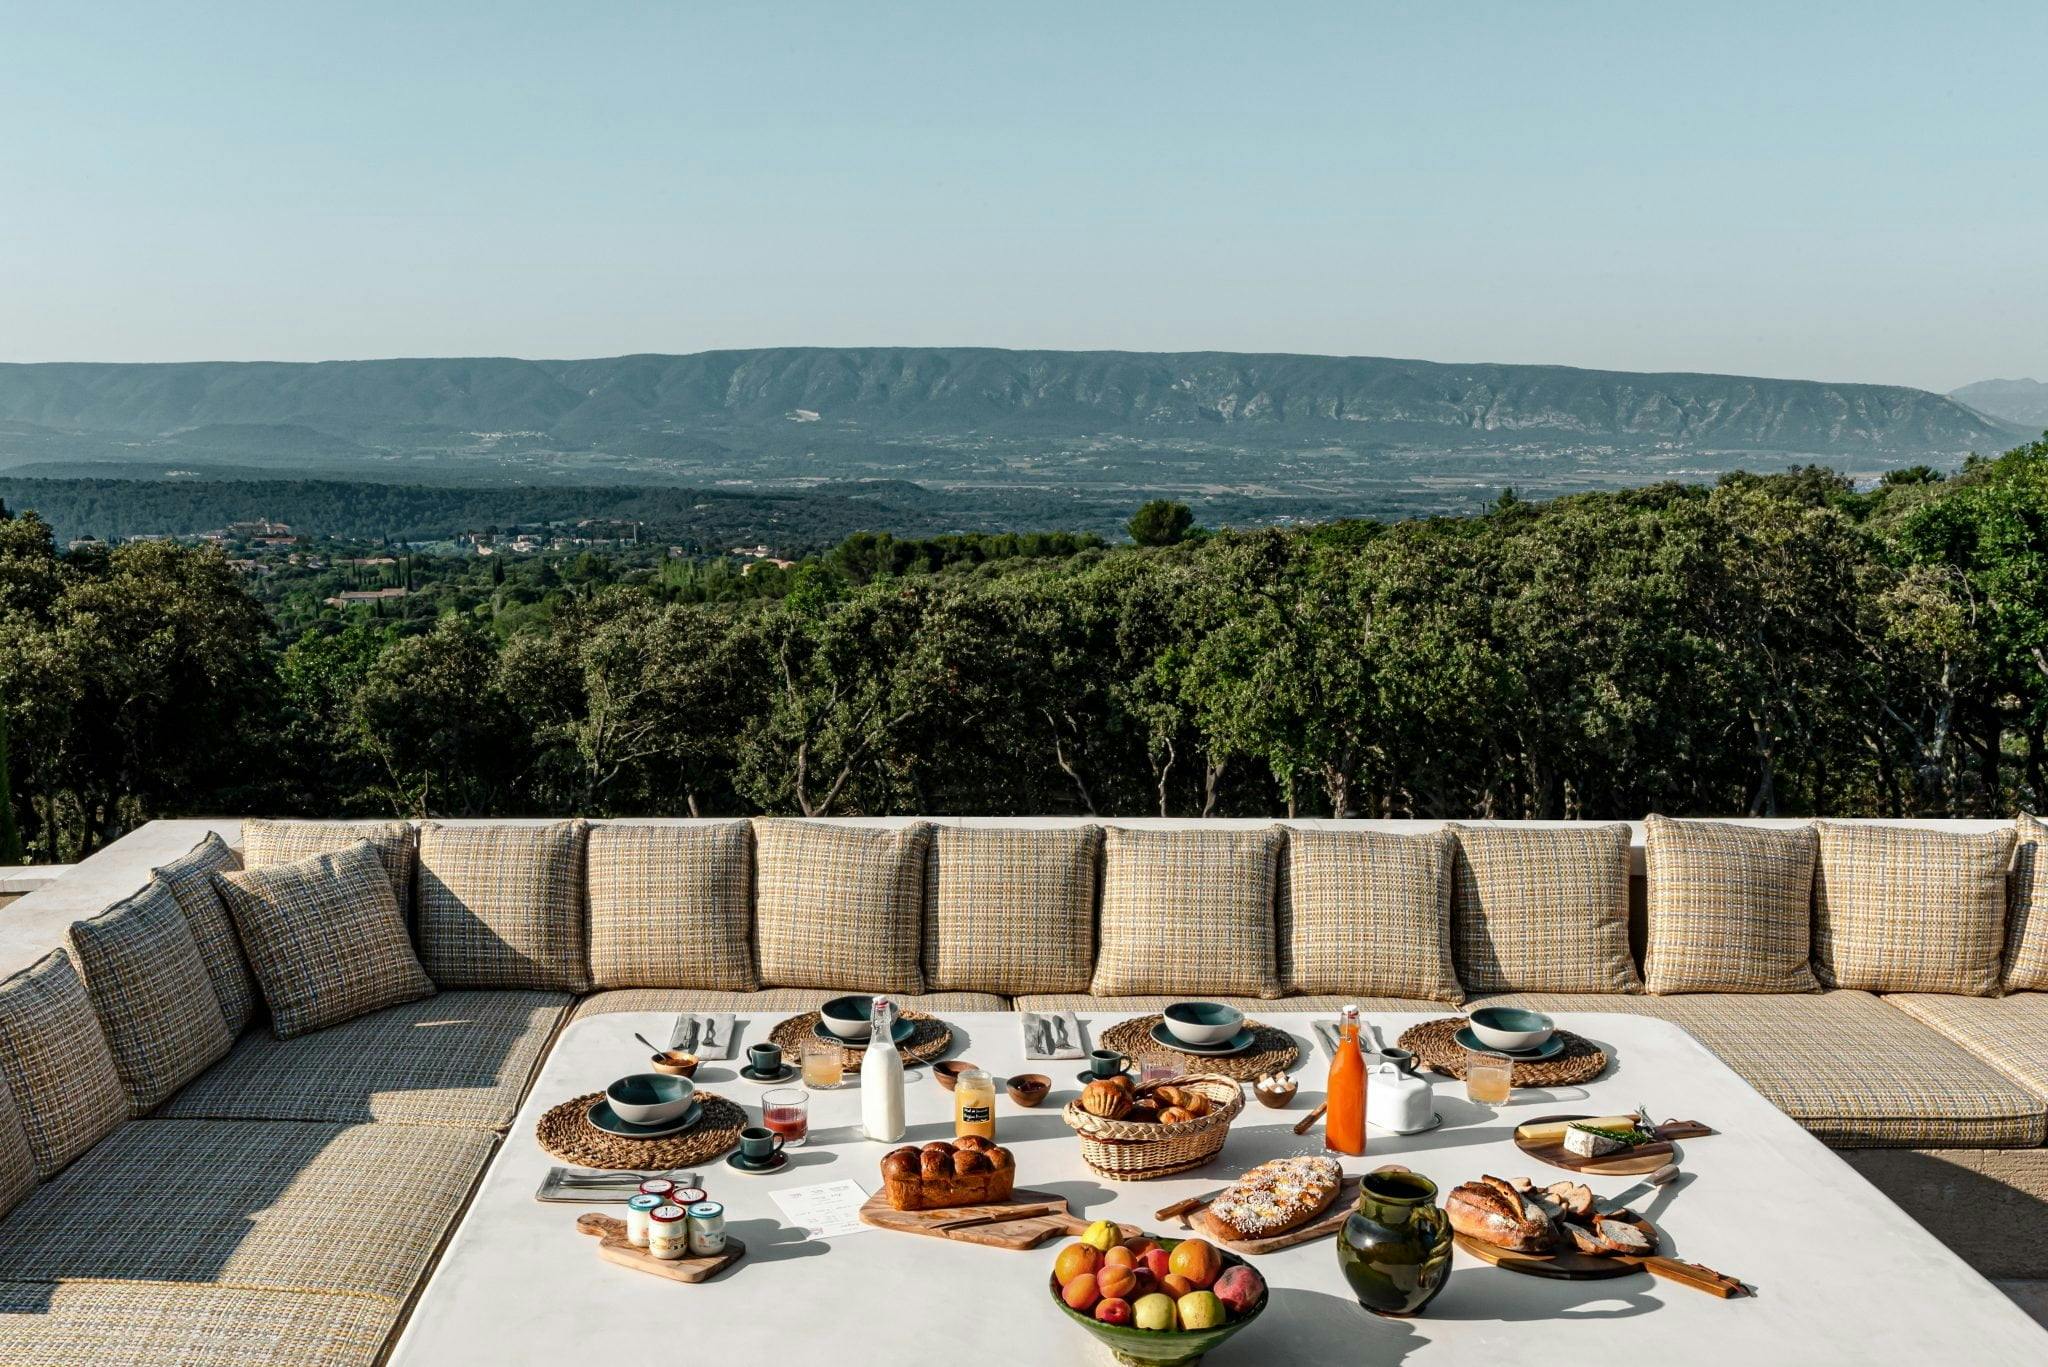 Amazing view on the provencal nature bench seat and full breakfast table in foreground at Les Hauts de Gordes